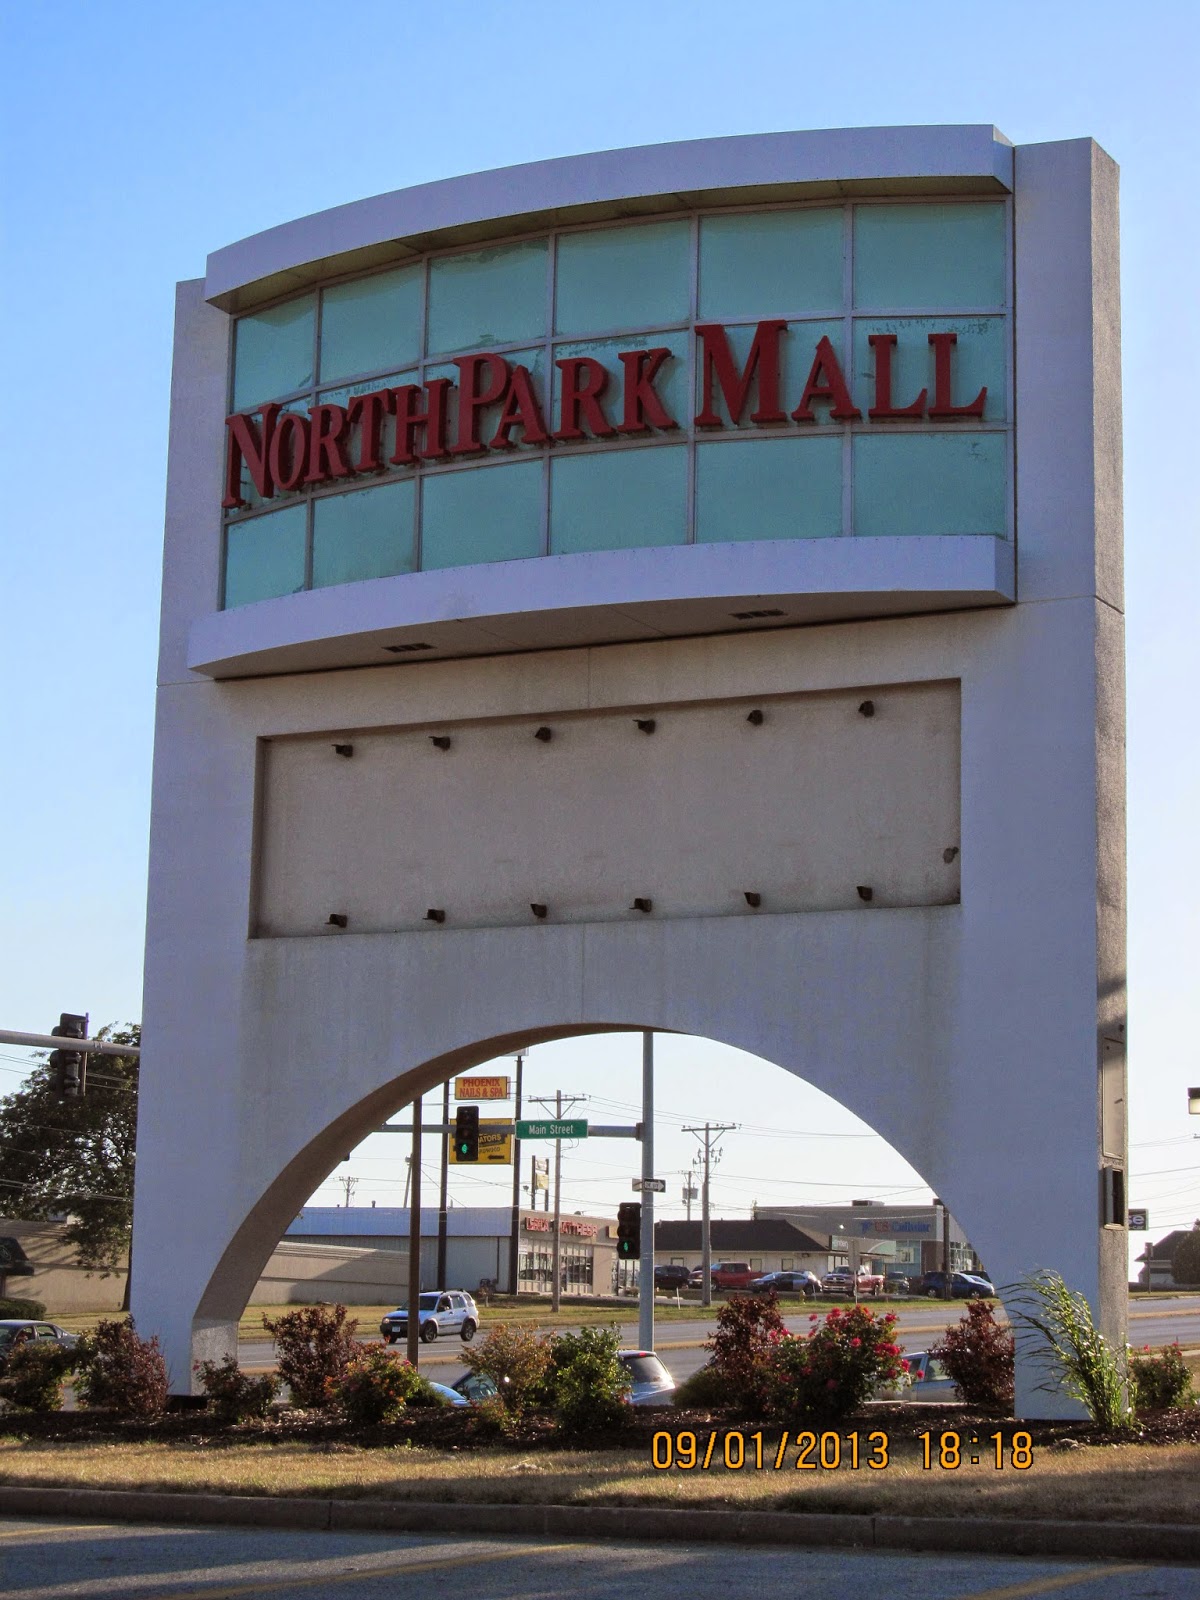 Northpark Mall - Davenport, Iowa - Justice, Opened in their…